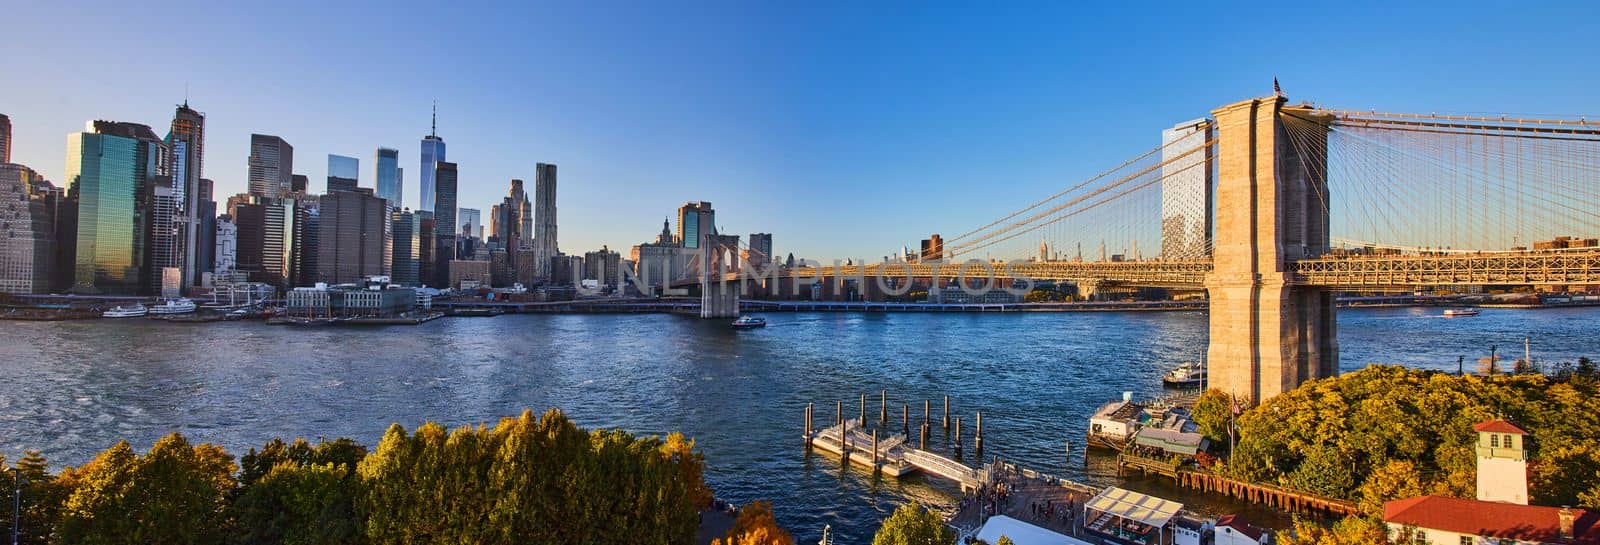 Image of Panoramic high view over Brooklyn New York City with bridge and city skyline at sunset